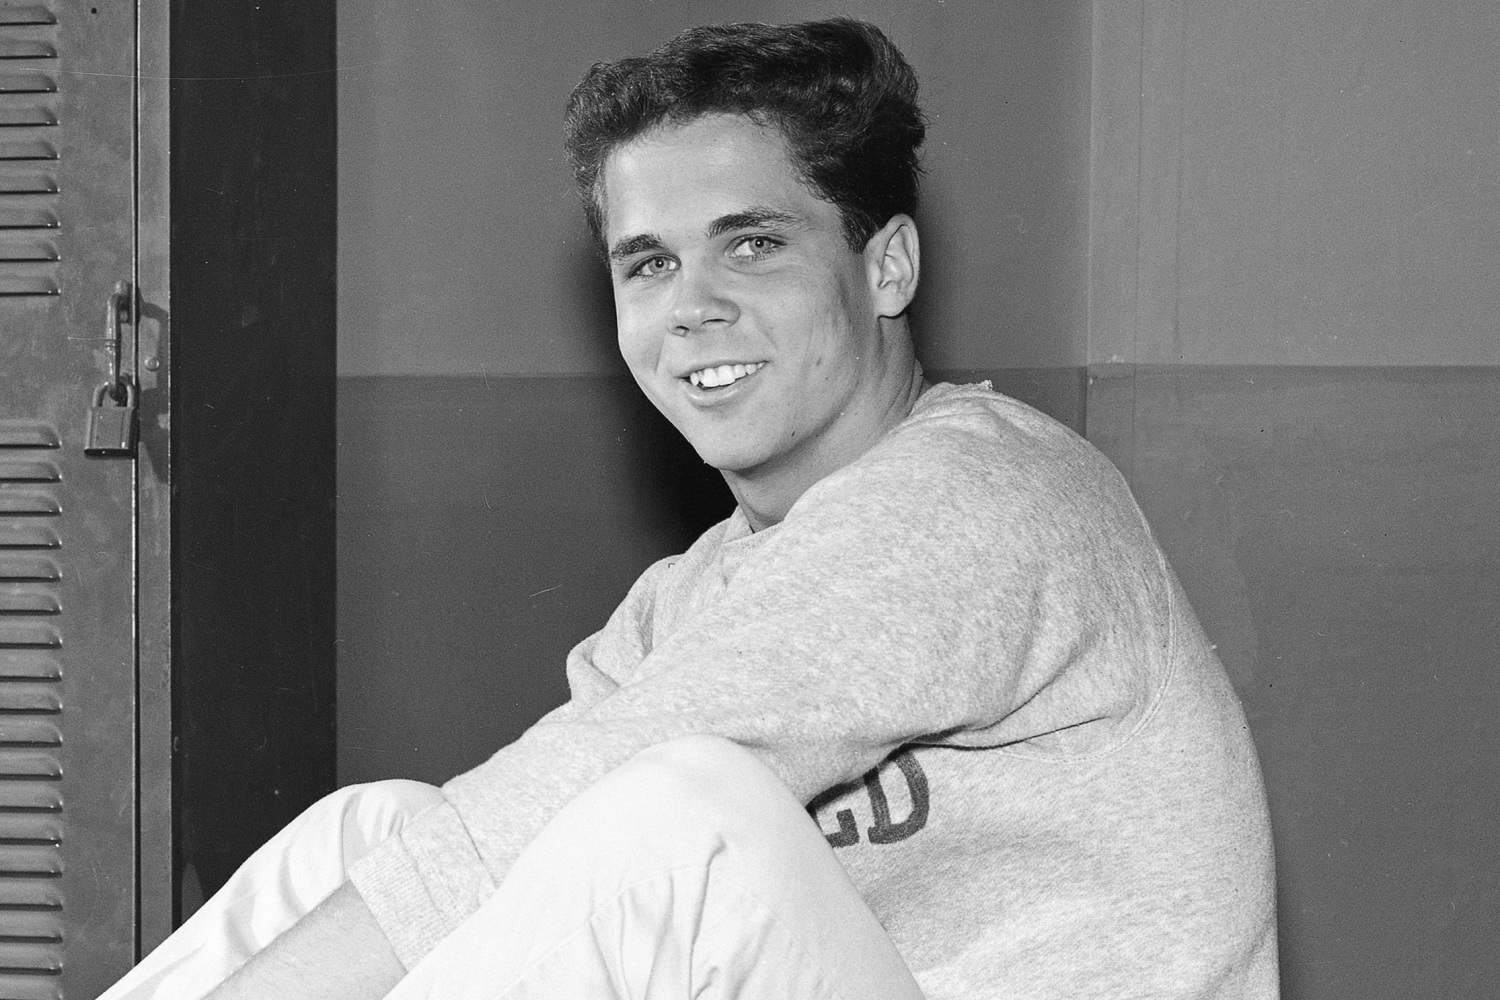 ‘Leave It to Beaver’ star Tony Dow is still alive, despite statement from his management saying he died